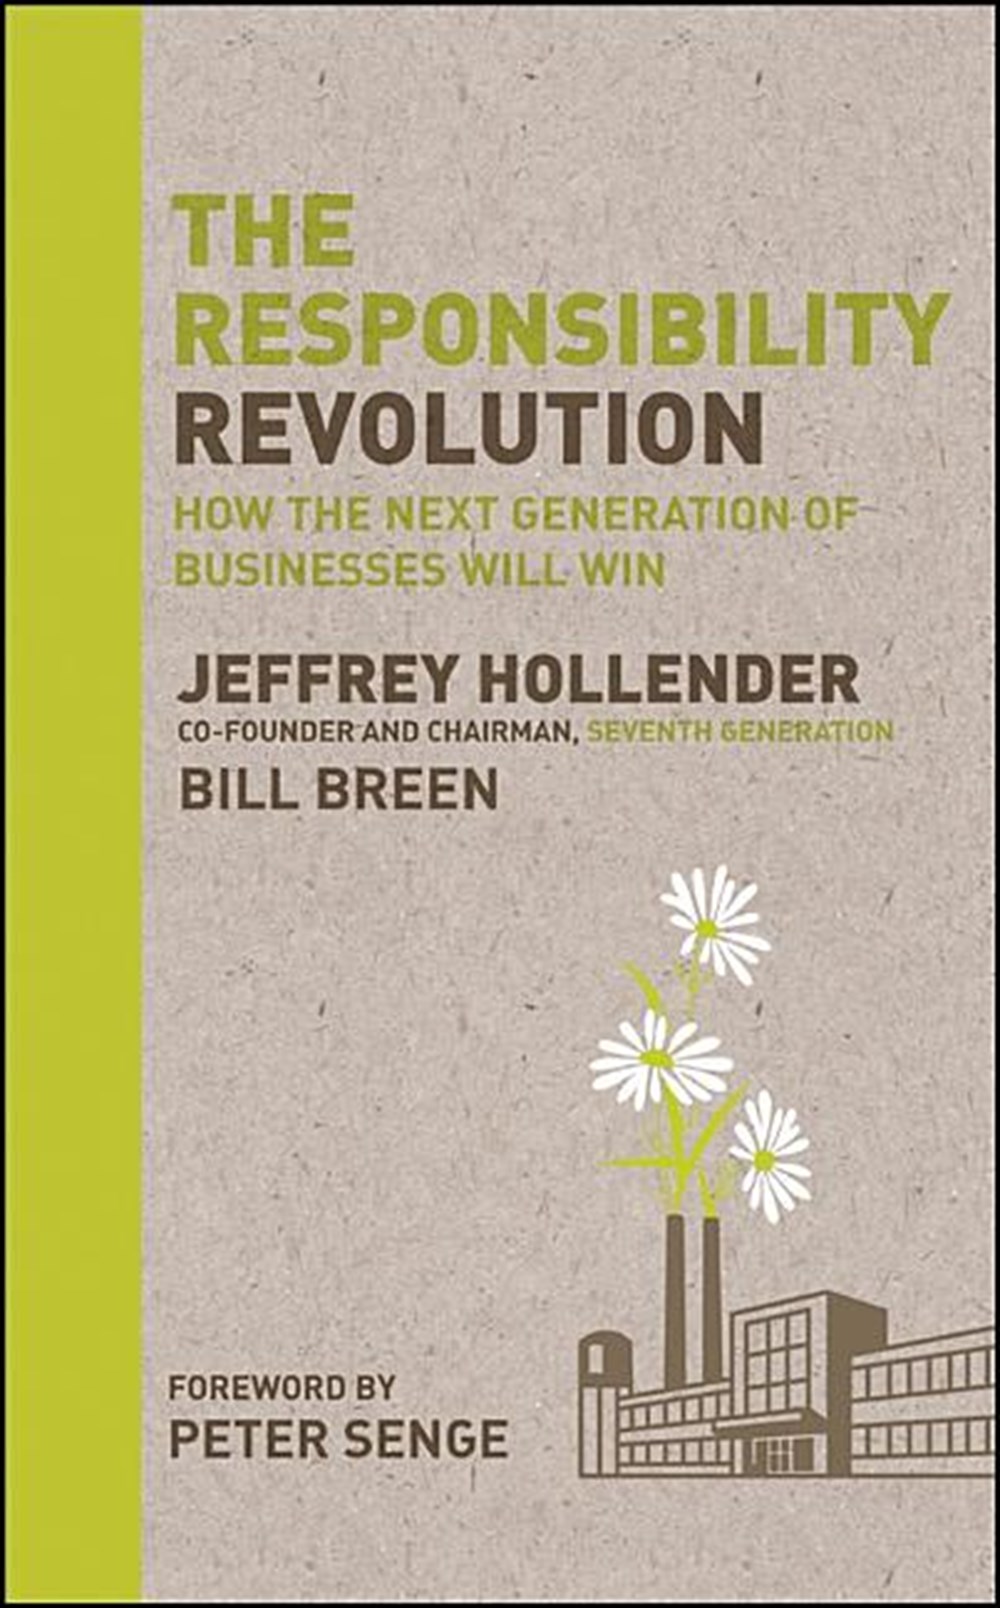 Responsibility Revolution: How the Next Generation of Businesses Will Win